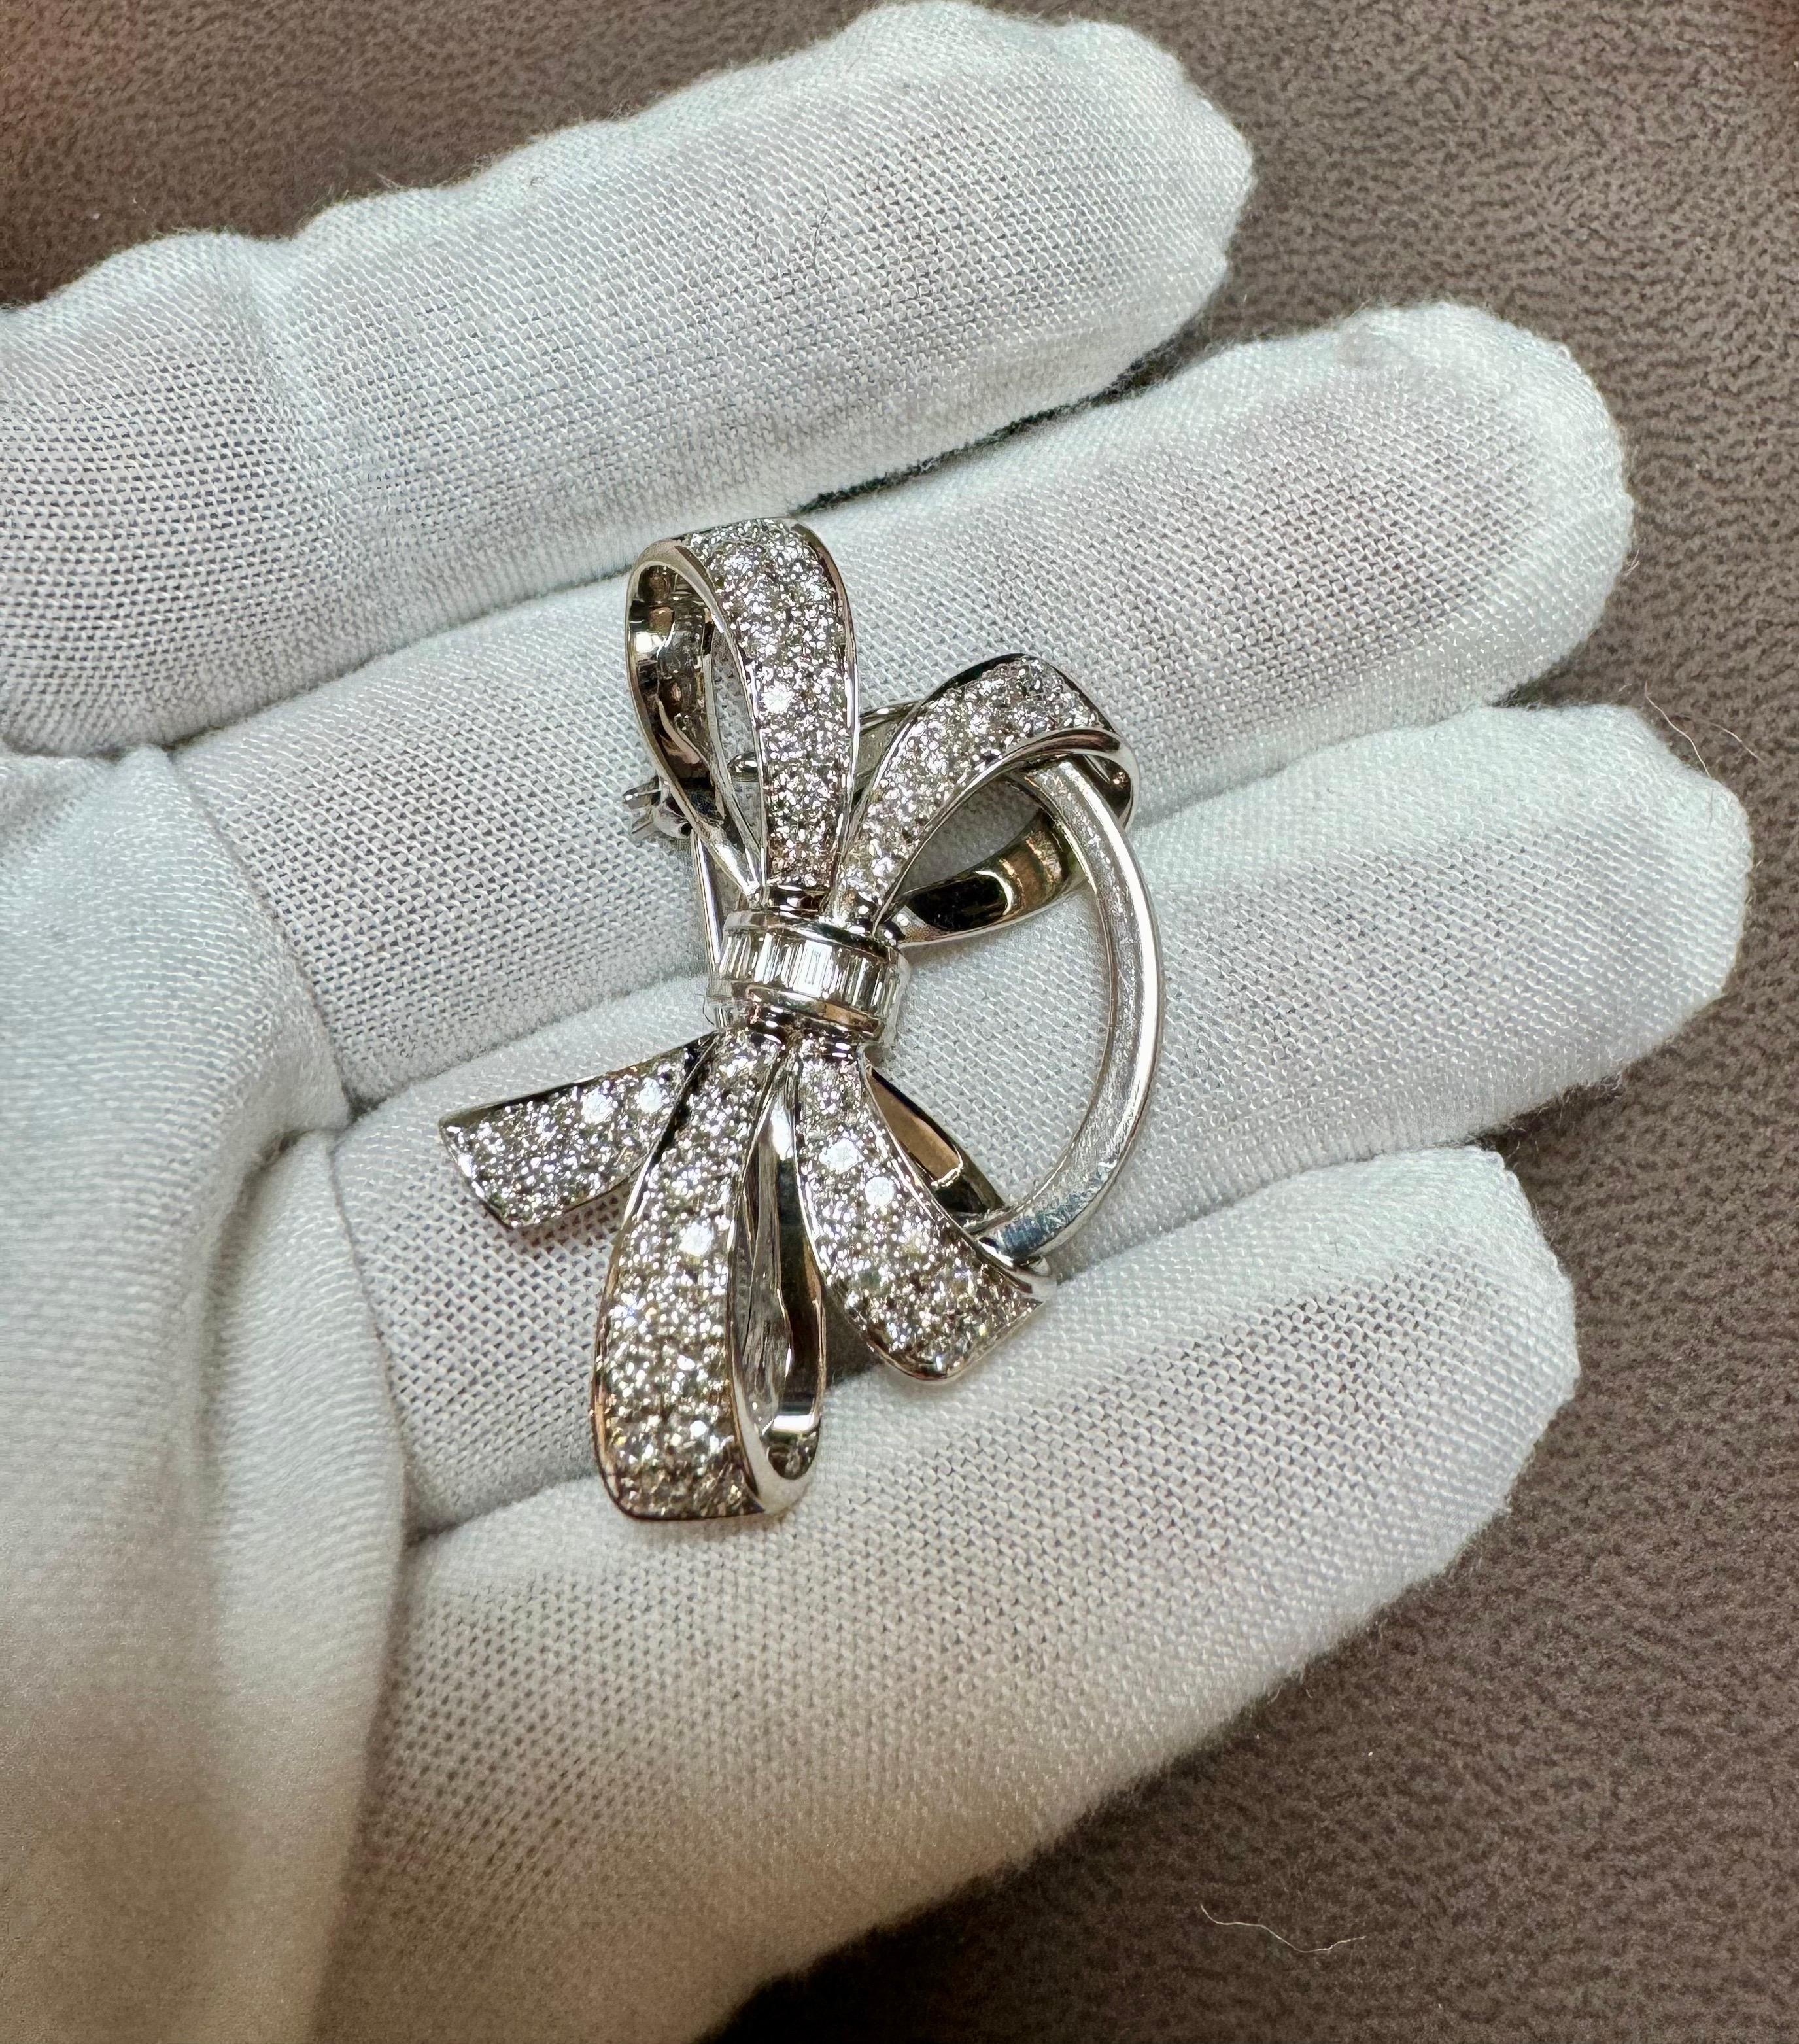 Vintage 2.55 Ct Diamond Bow Brooch Pin /Pendant in 18 K White Gold For Sale 2